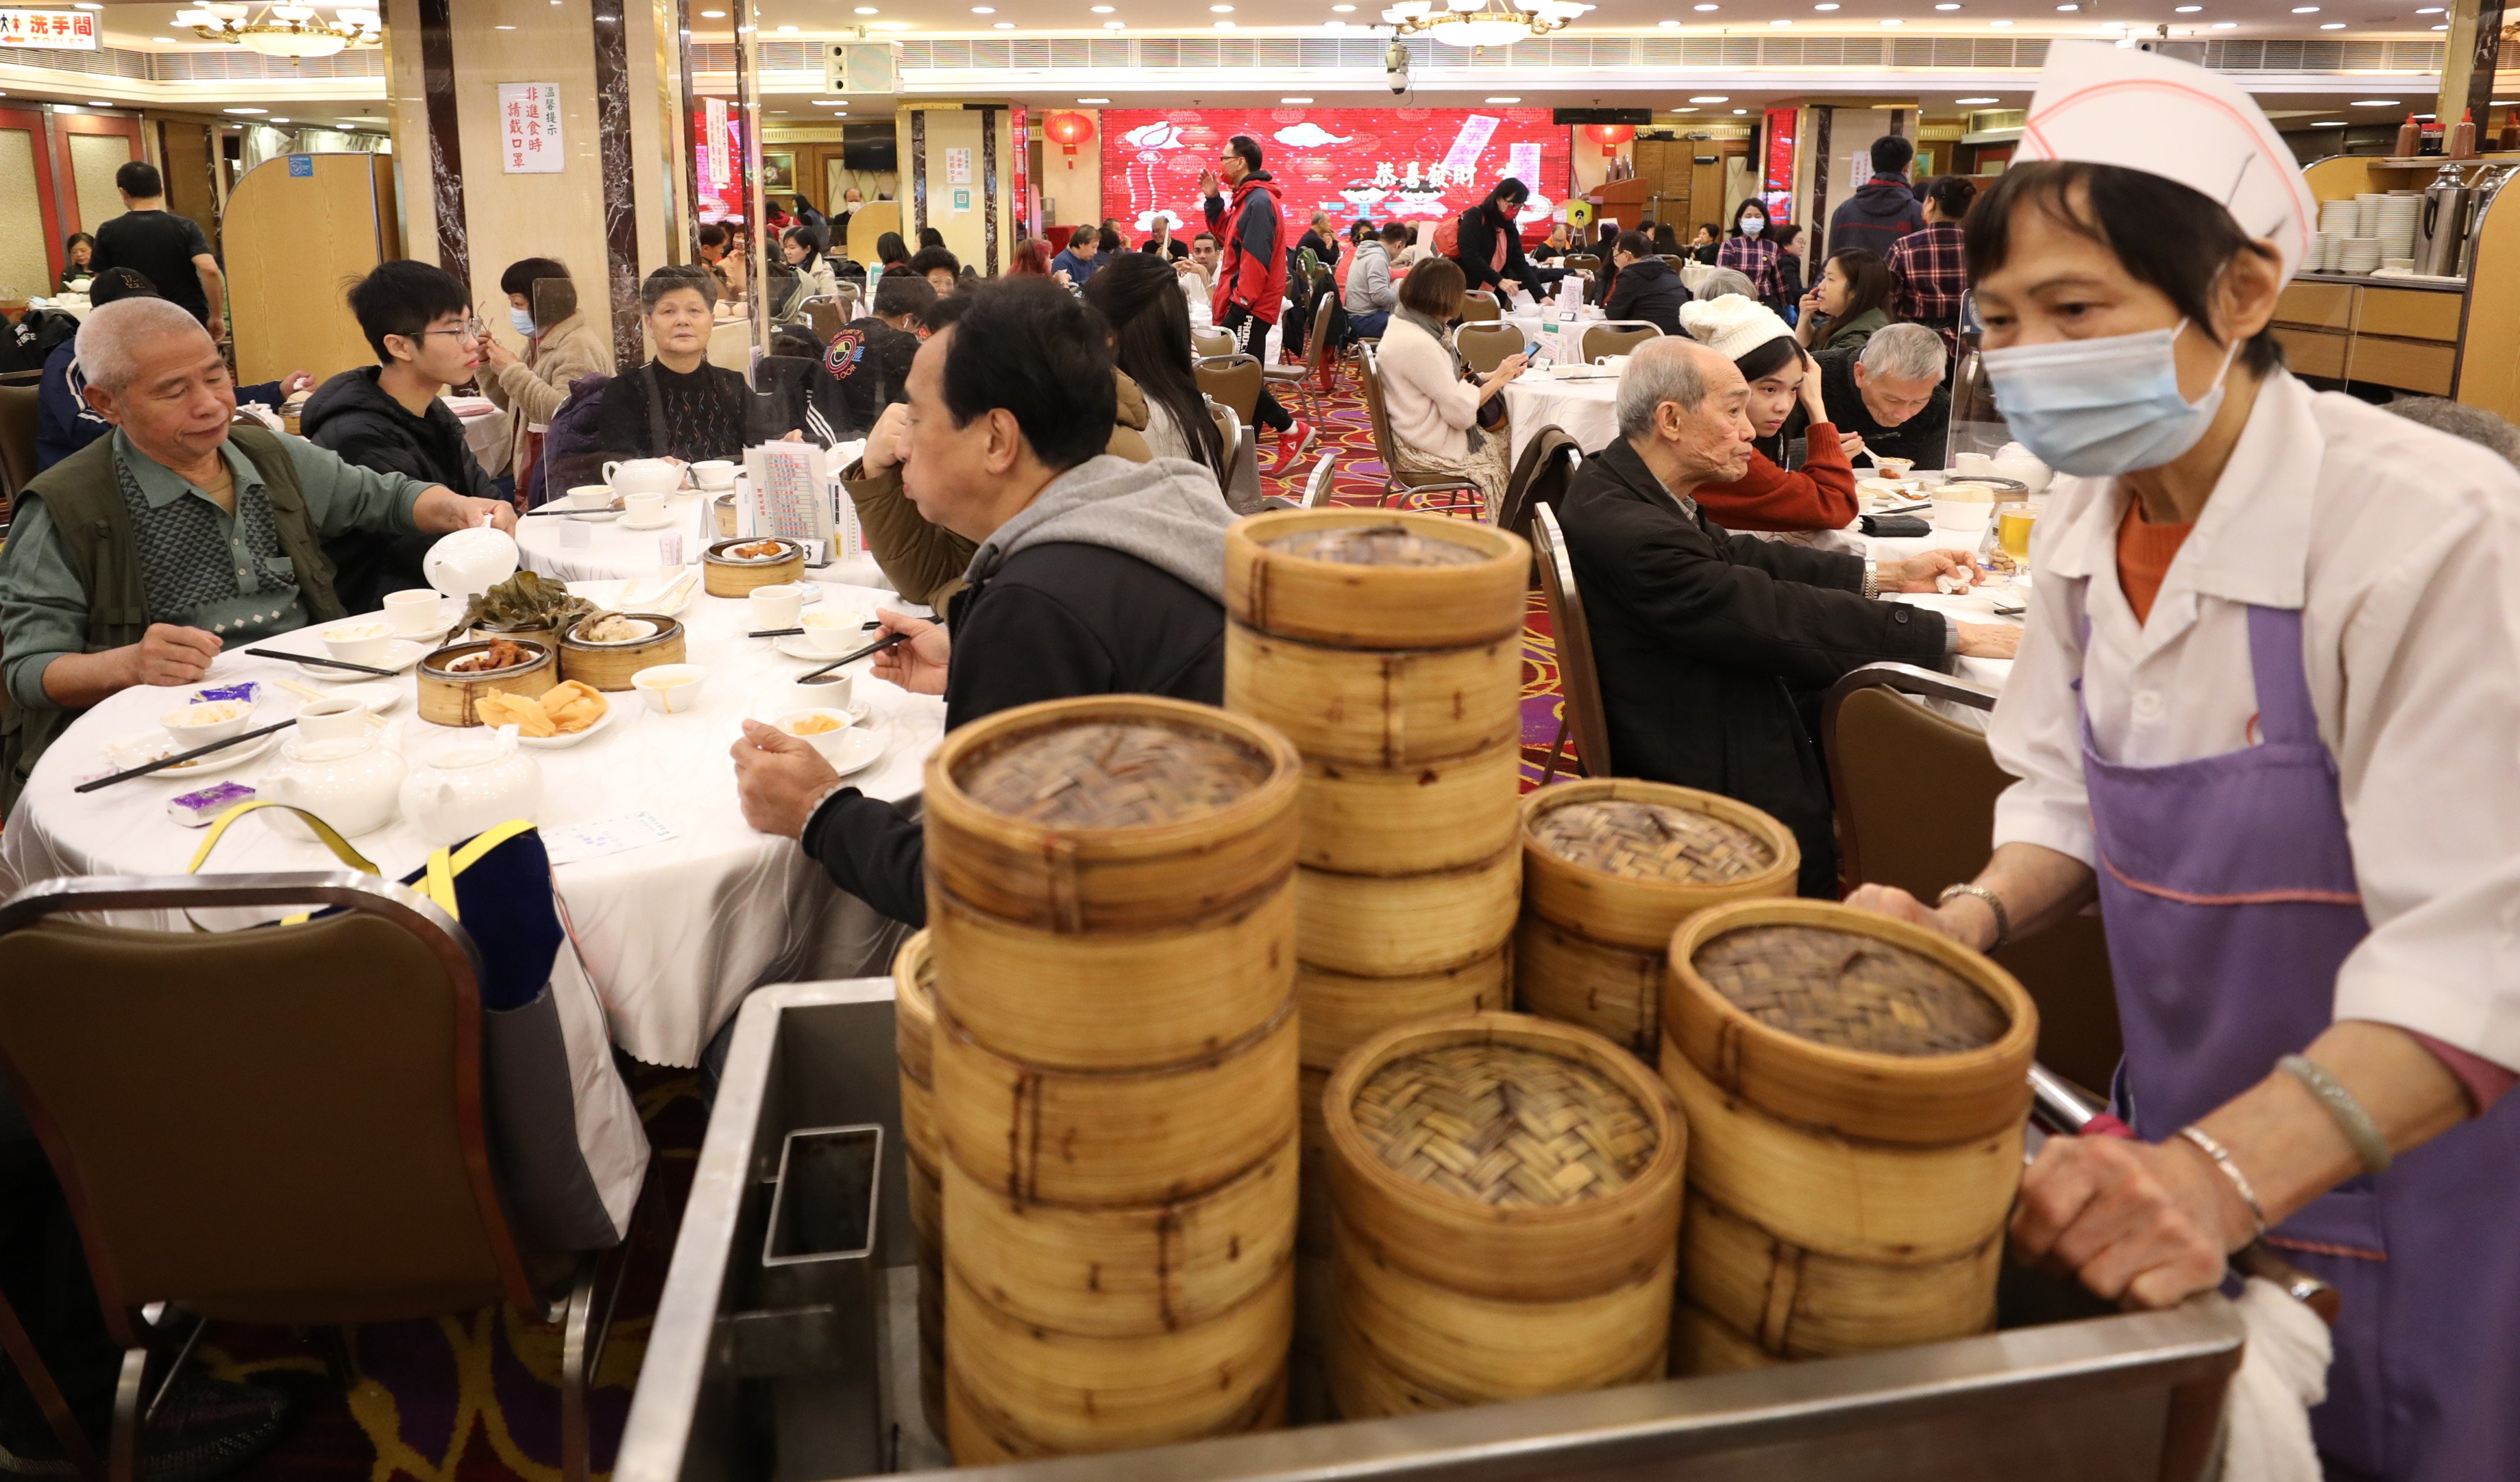 Some restaurants will offer a 29 per cent discount on menu items, but industry insiders say they may not be making any profits from the move. Photo: Jelly Tse